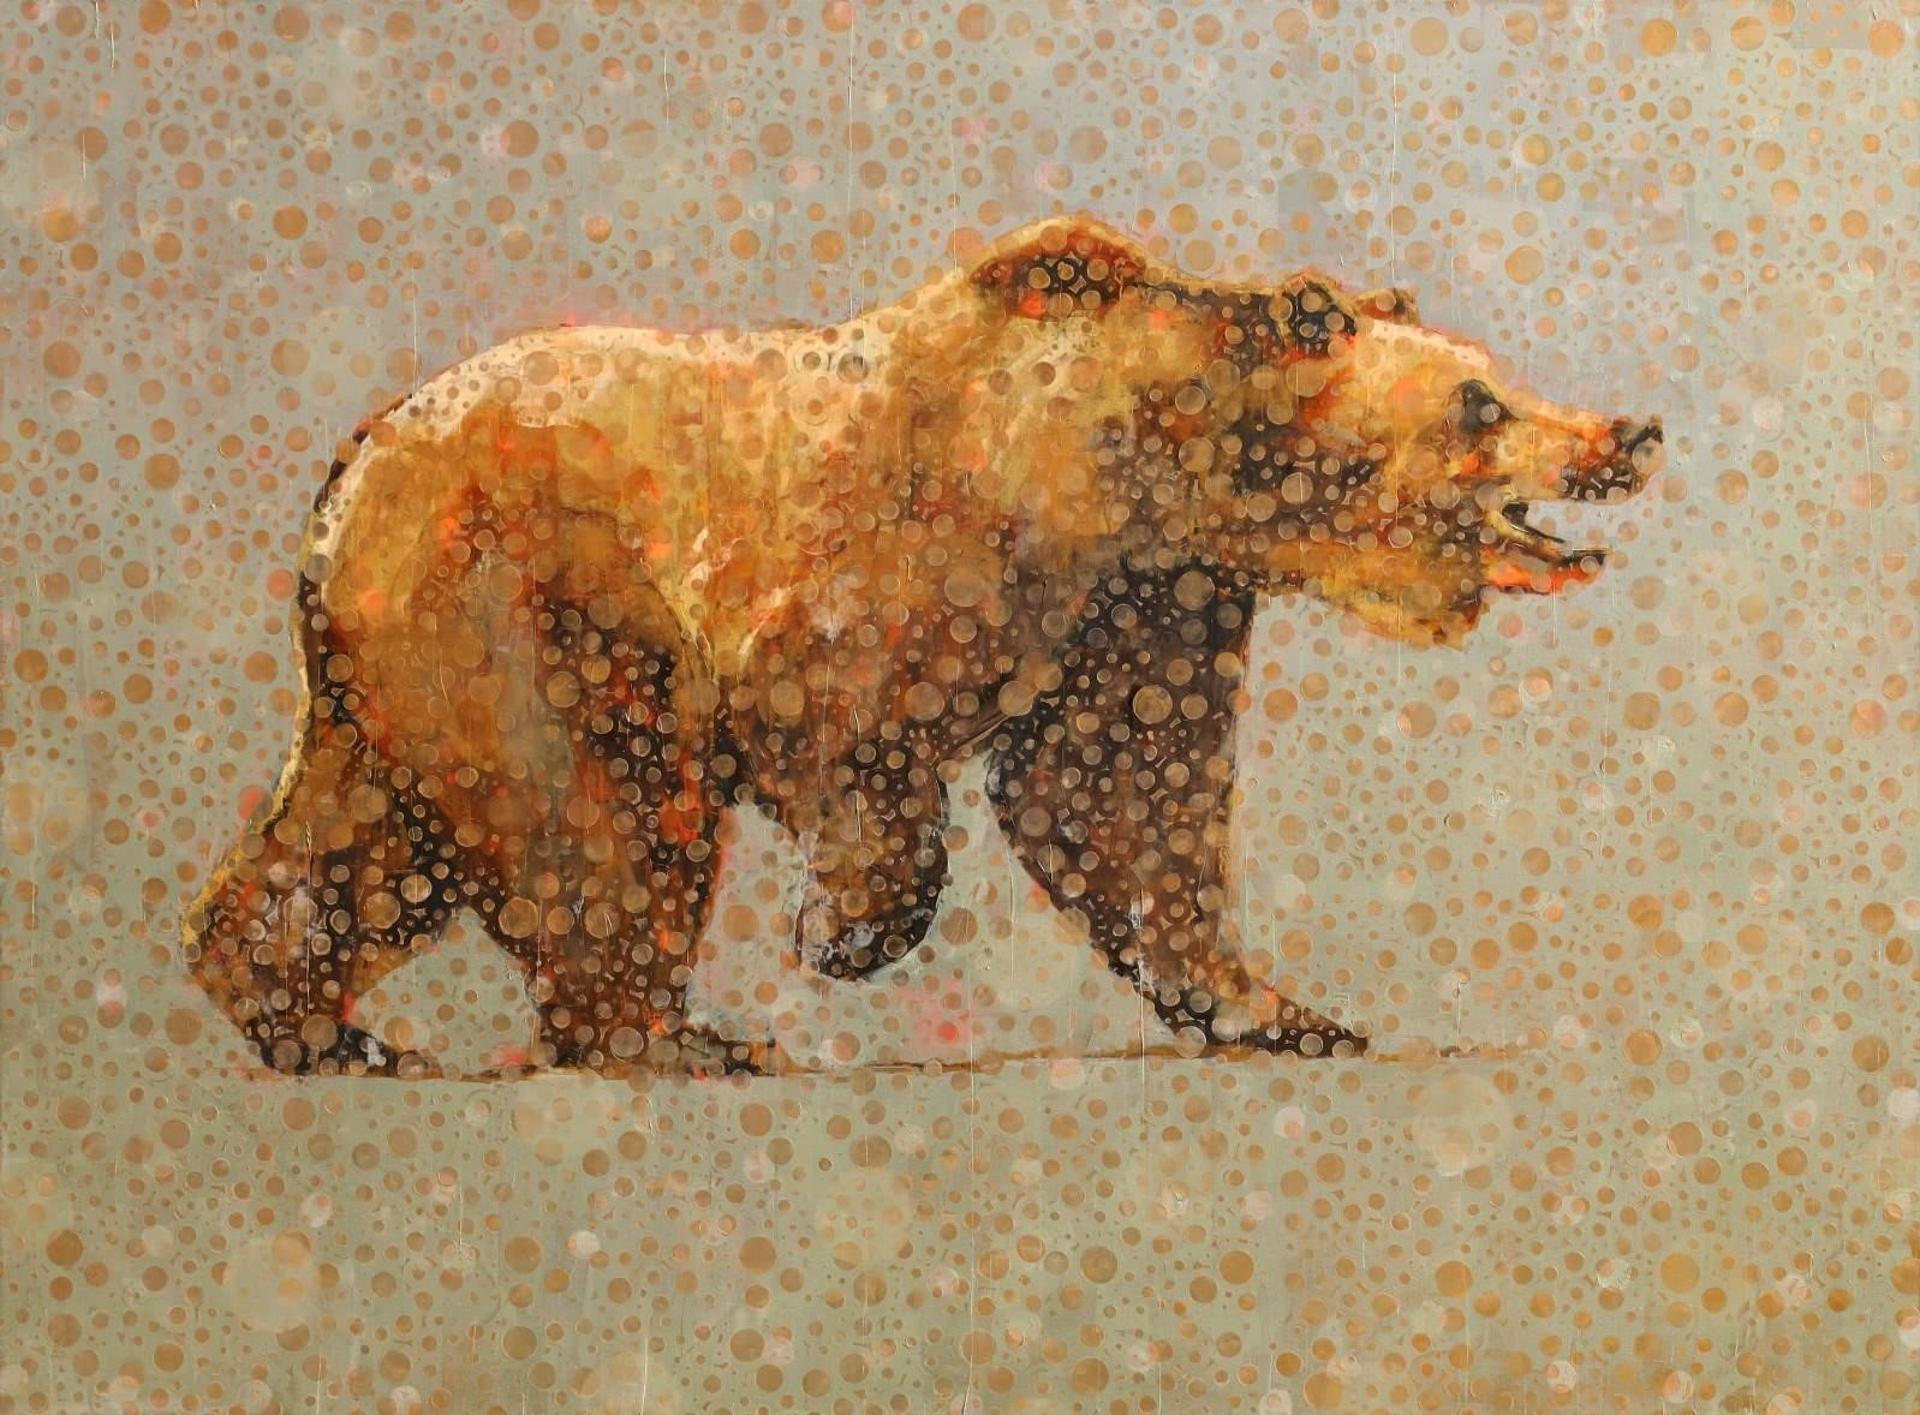 Les Thomas (1962) - Animal Painting #014-1138 (Grizzly); 2014